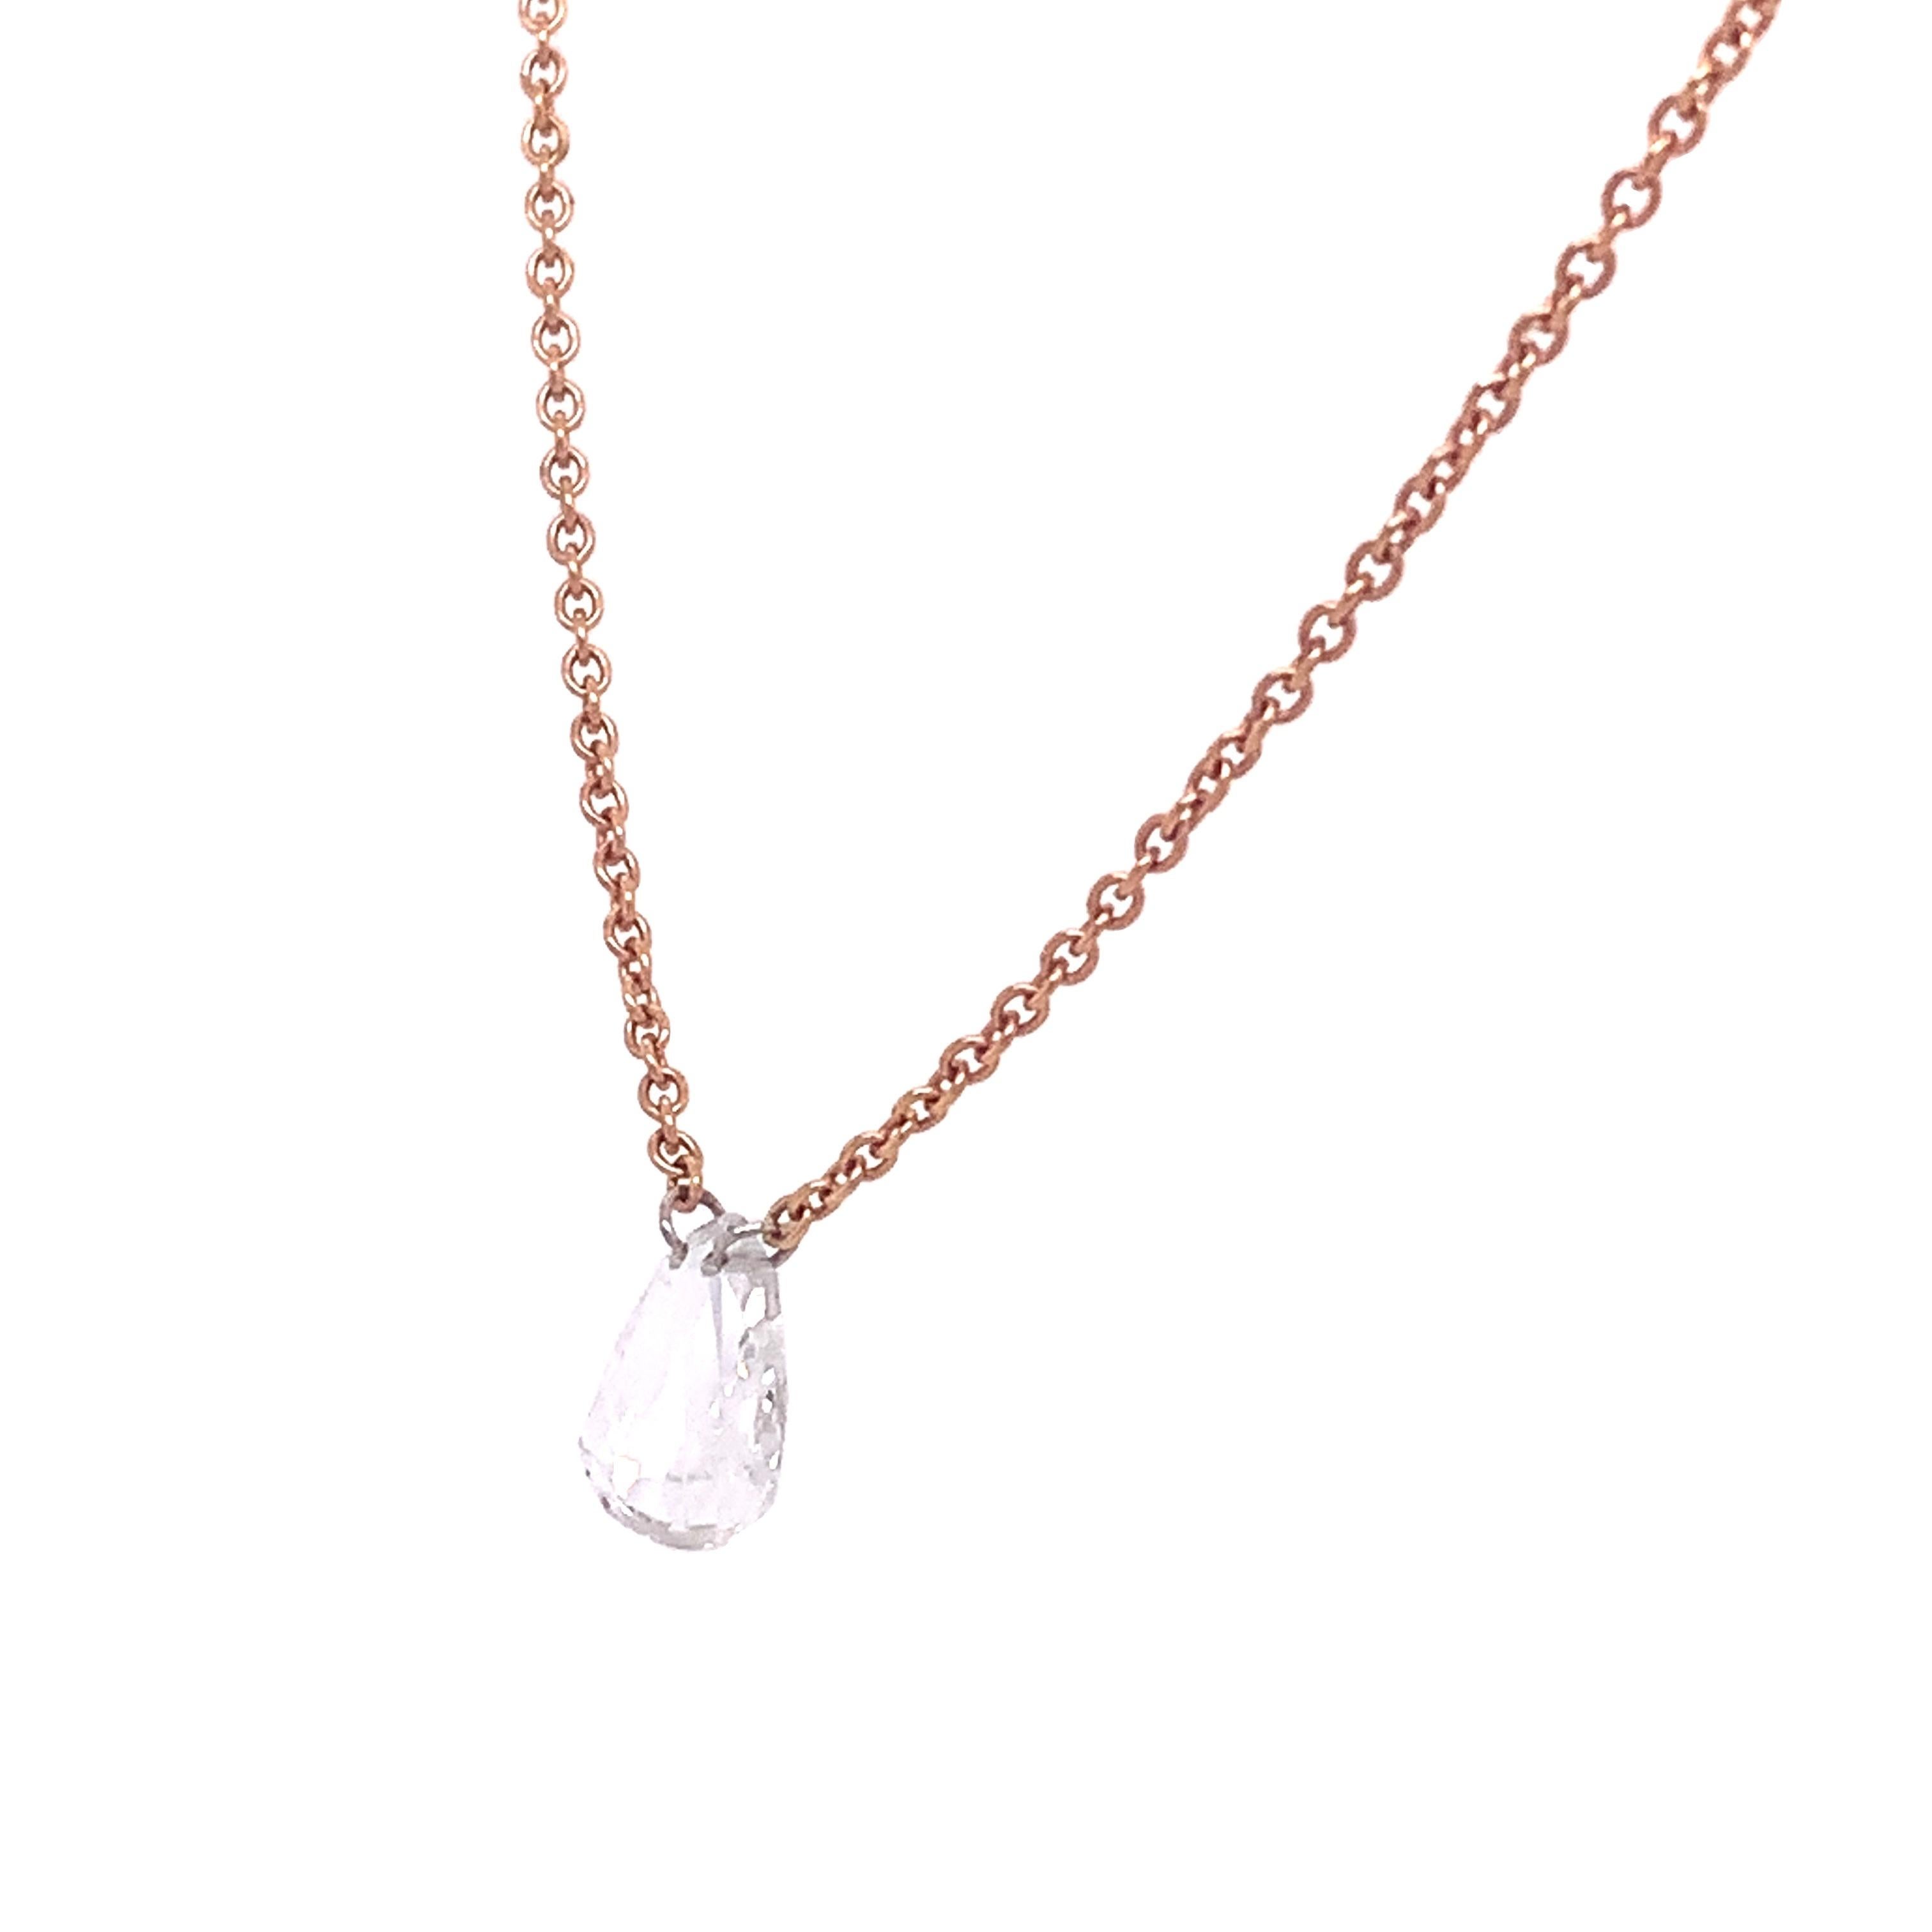 Dainty Collection

A delicate Rose Gold necklace exuding elegance and refined simplicity with the magnificent beauty of a 0.51 carat Rose Cut fancy shape Diamond.